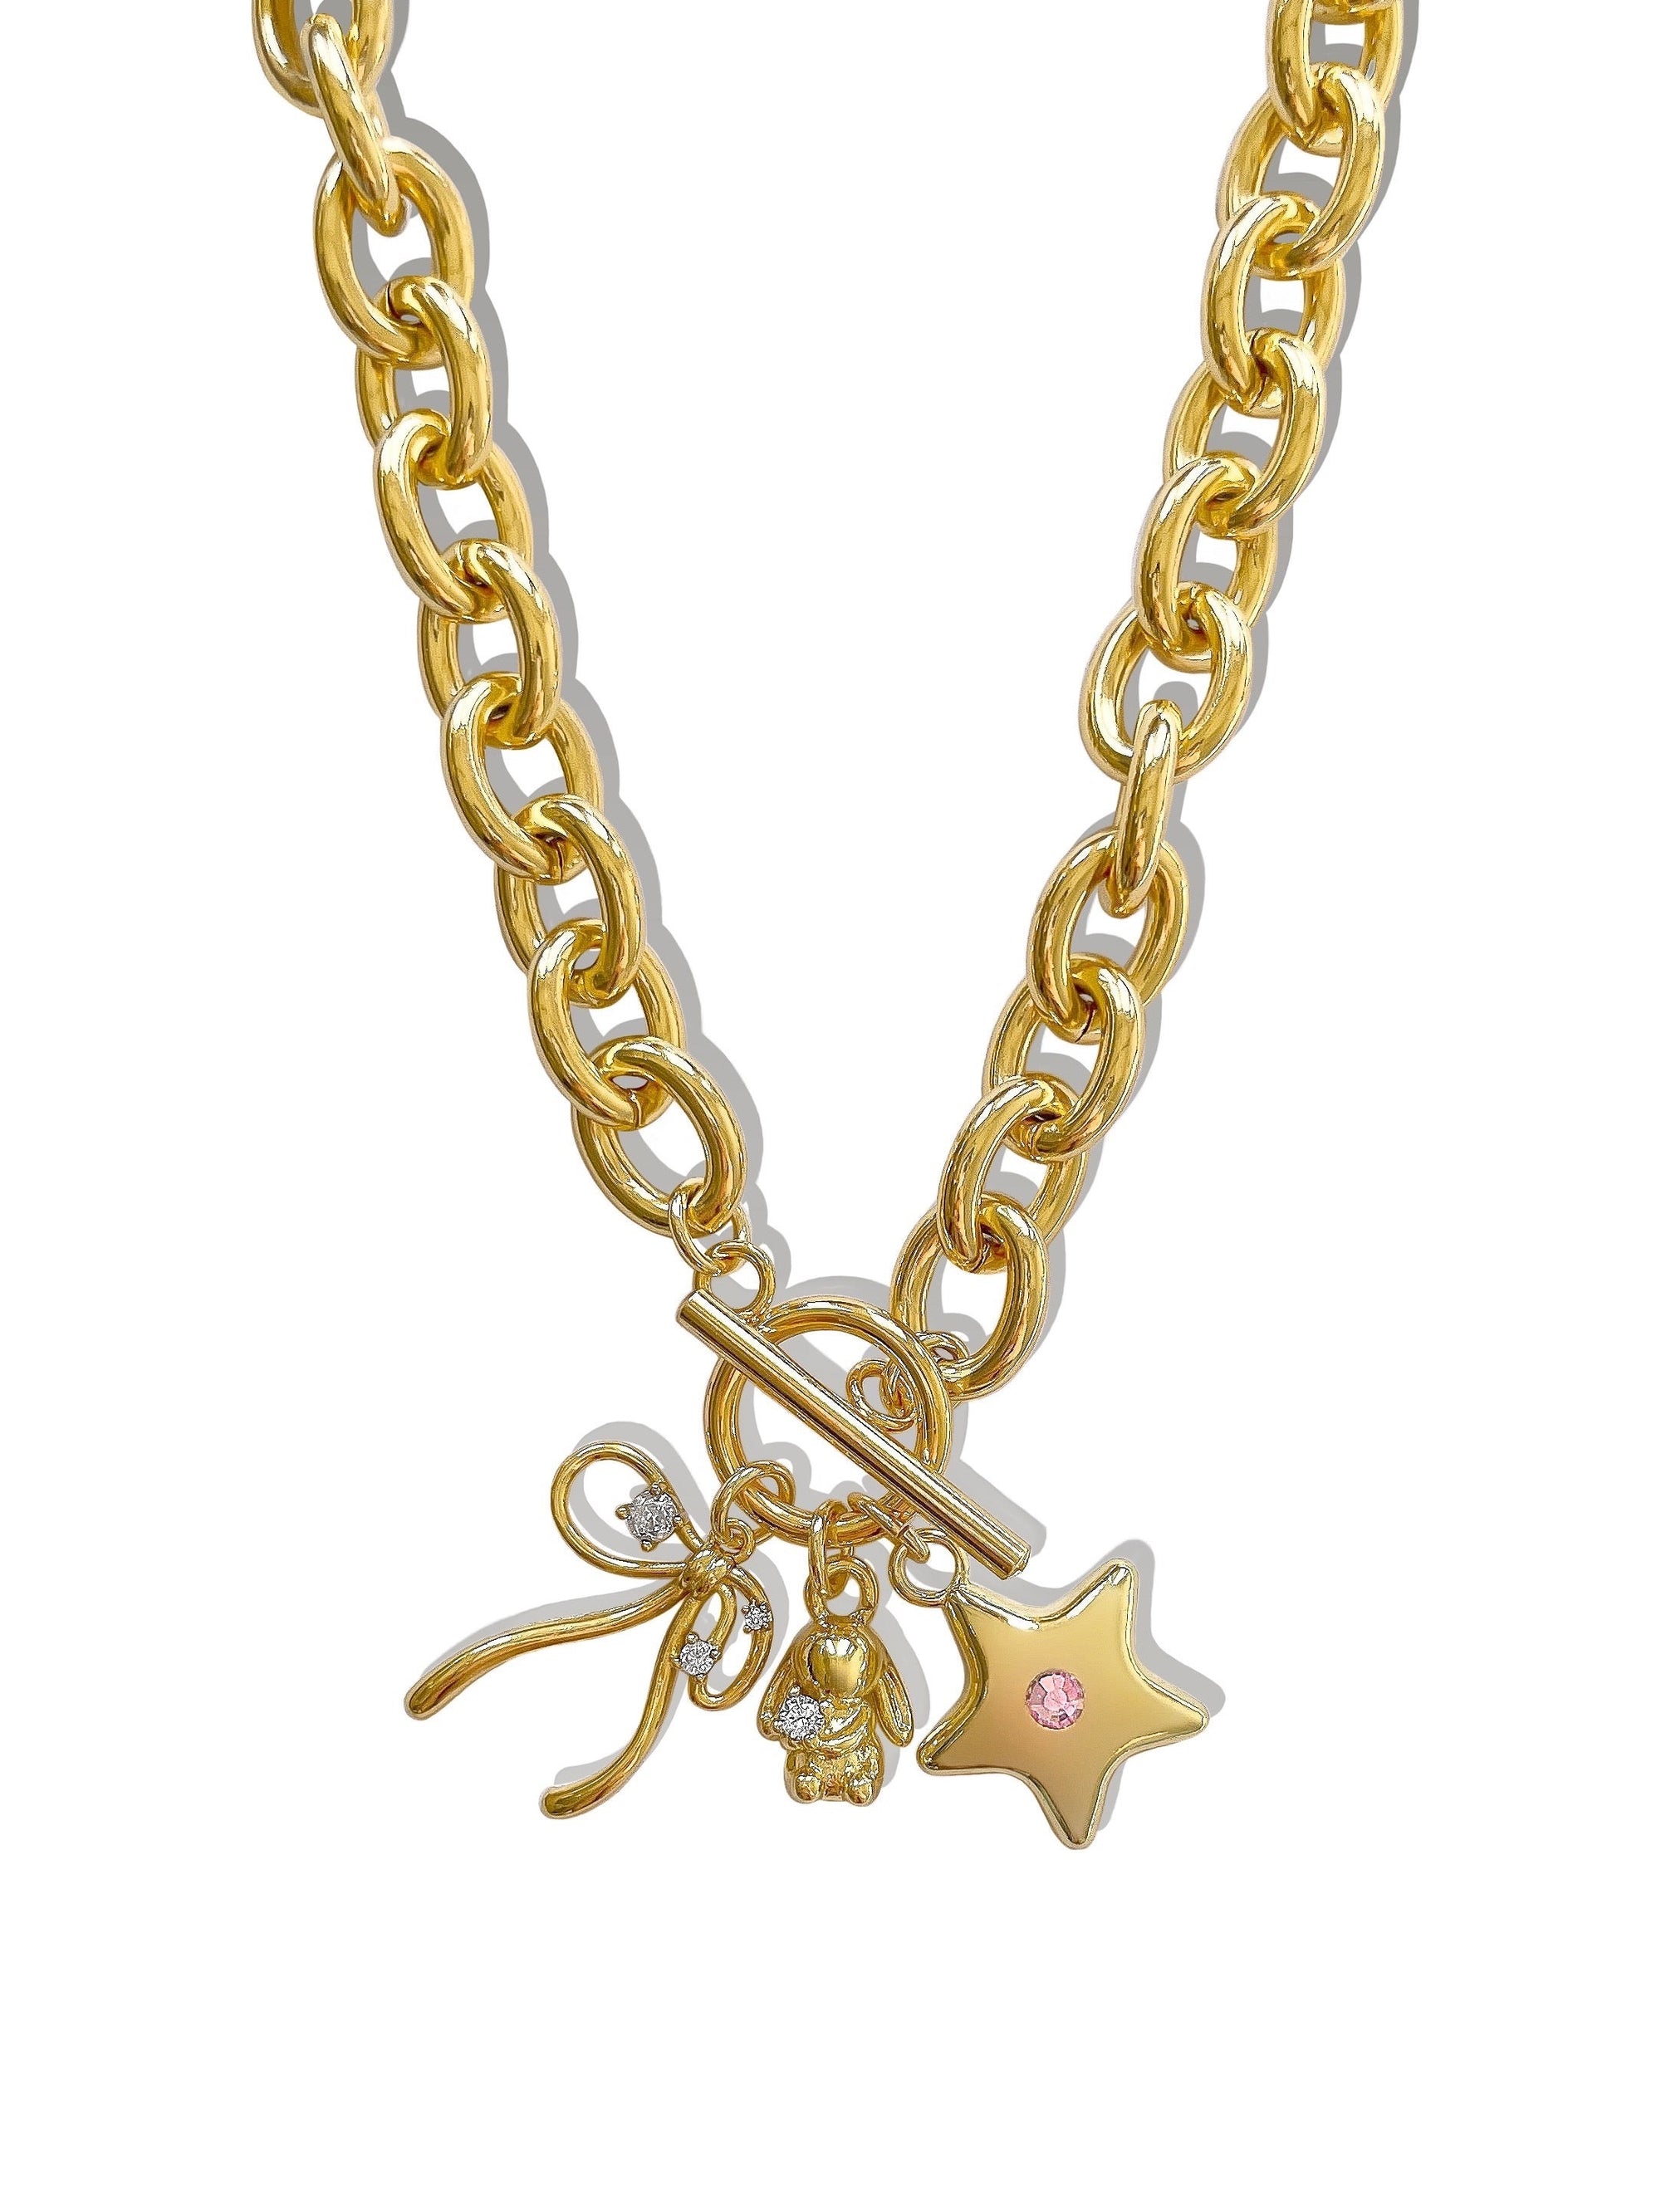 MIFFY GOLD CHARM NECKLACE